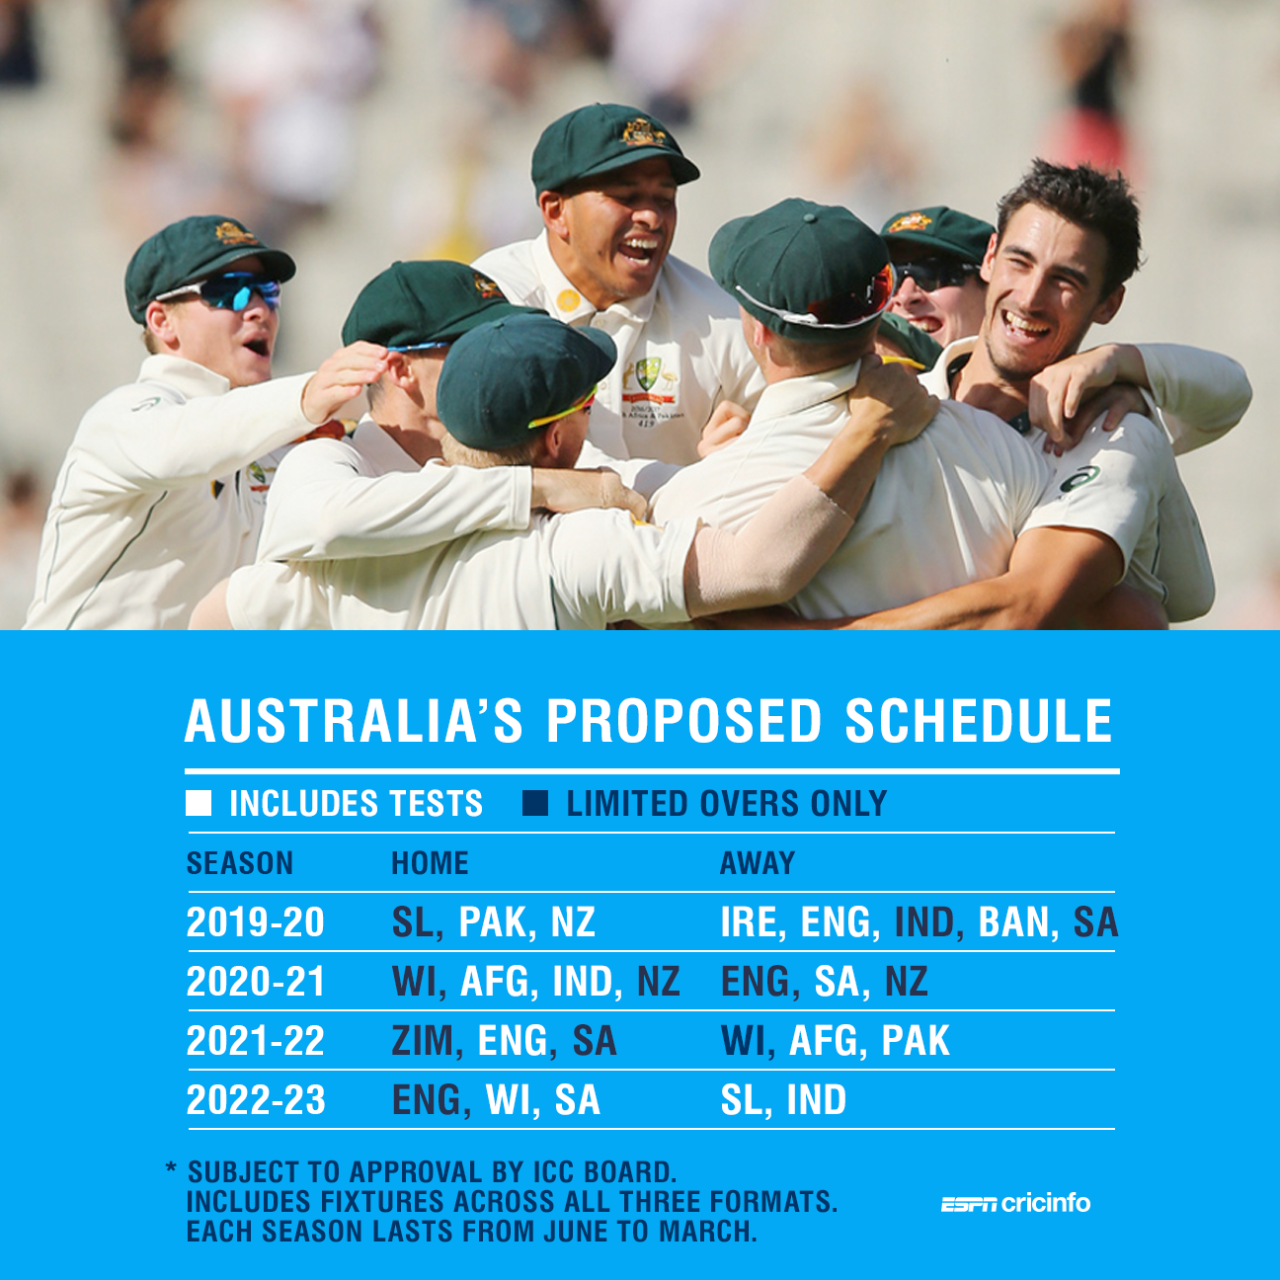 Australia are set to play 40 Tests over the next FTP cycle, 60% of them against India, England and South Africa